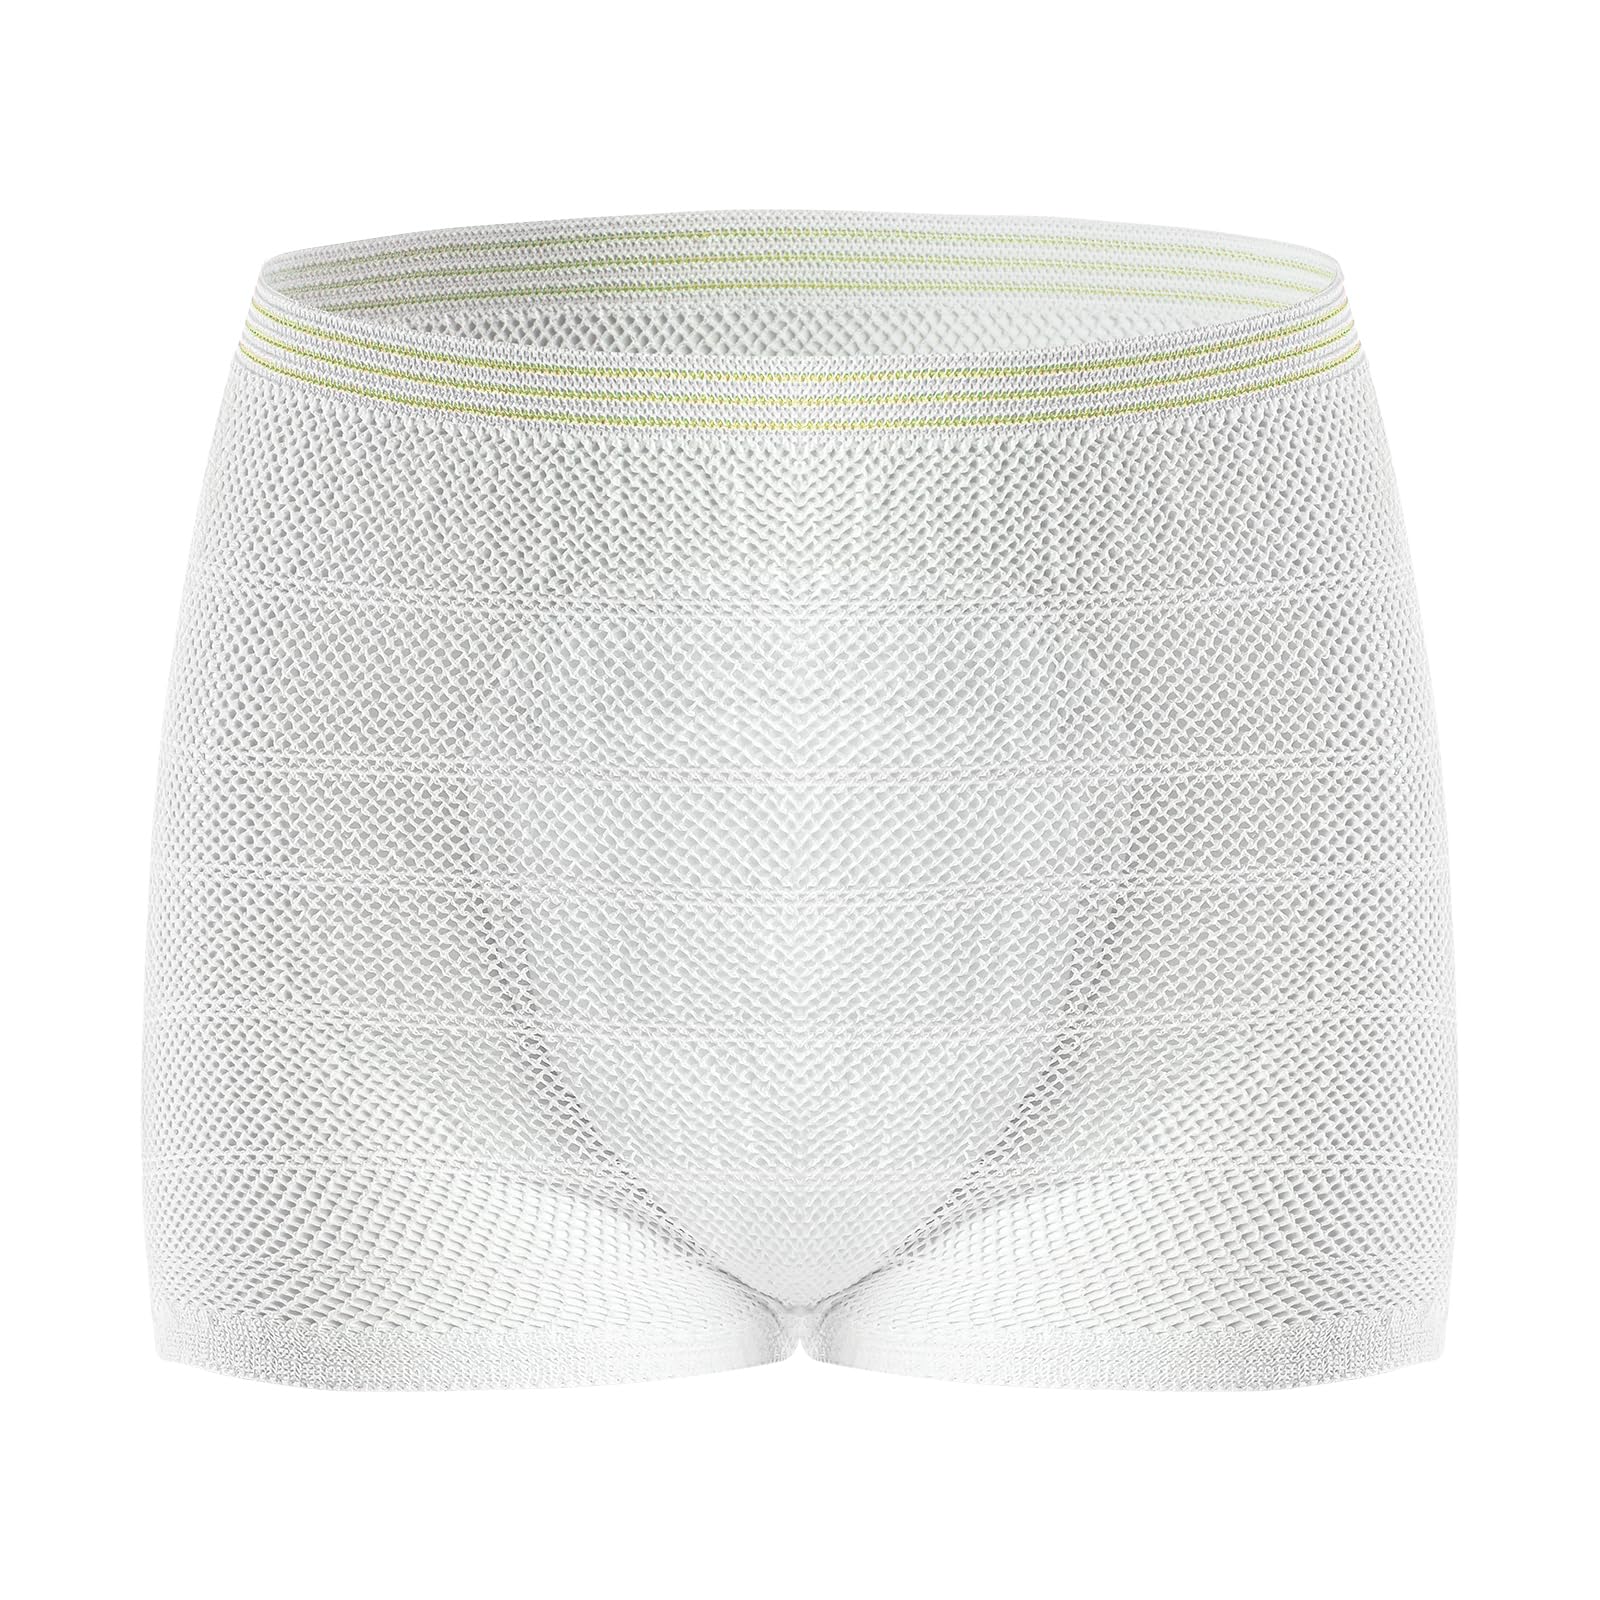 Hospital Mesh Underwear Disposable Panties for Postpartum & Incontinence